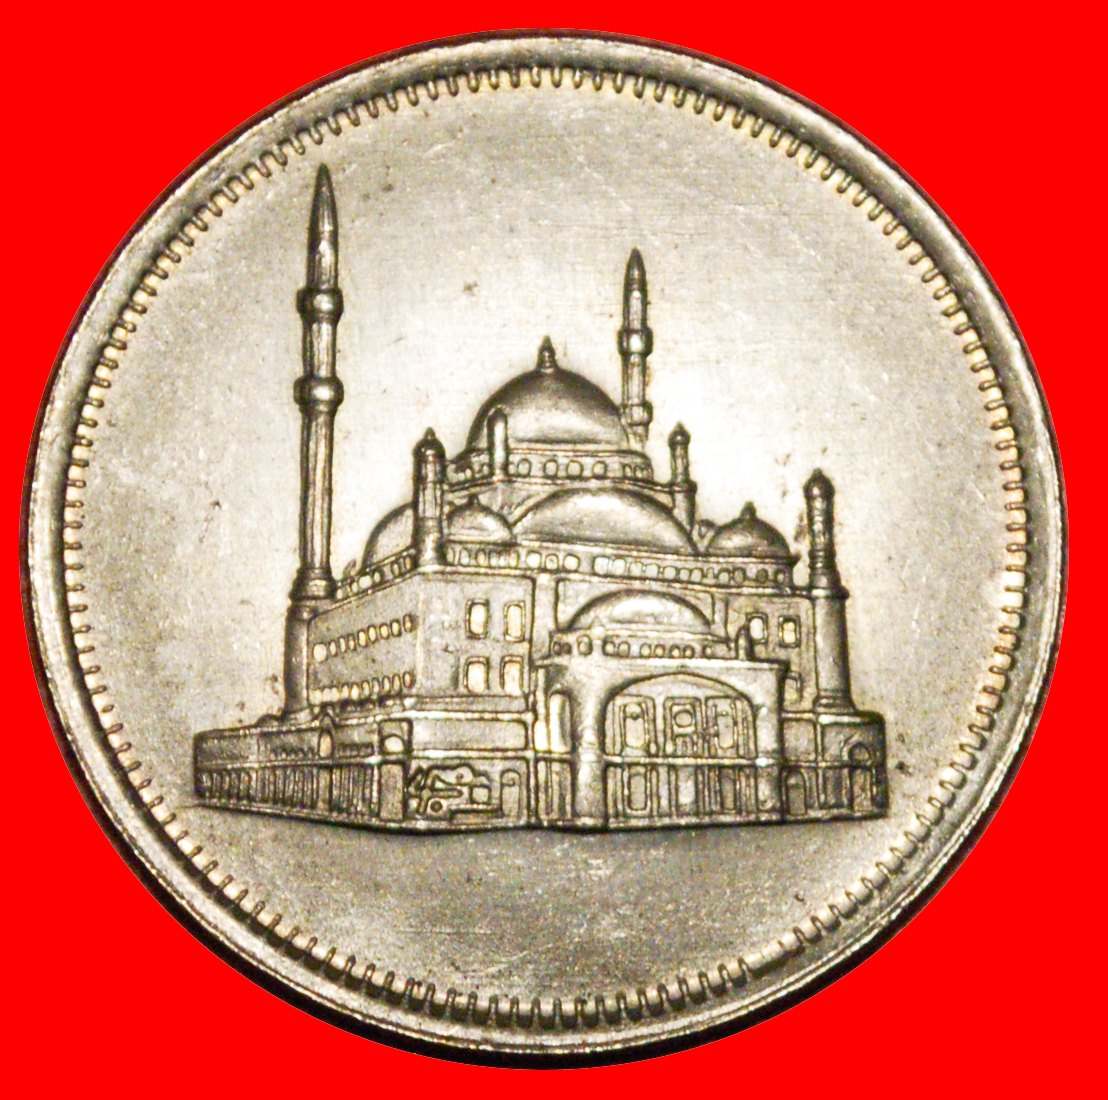  * MOSQUE: EGYPT ★ 20 PIASTERS 1404-1984 DISCOVERY COIN 1+A UNC MINT LUSTRE! LOW START! ★ NO RESERVE!   